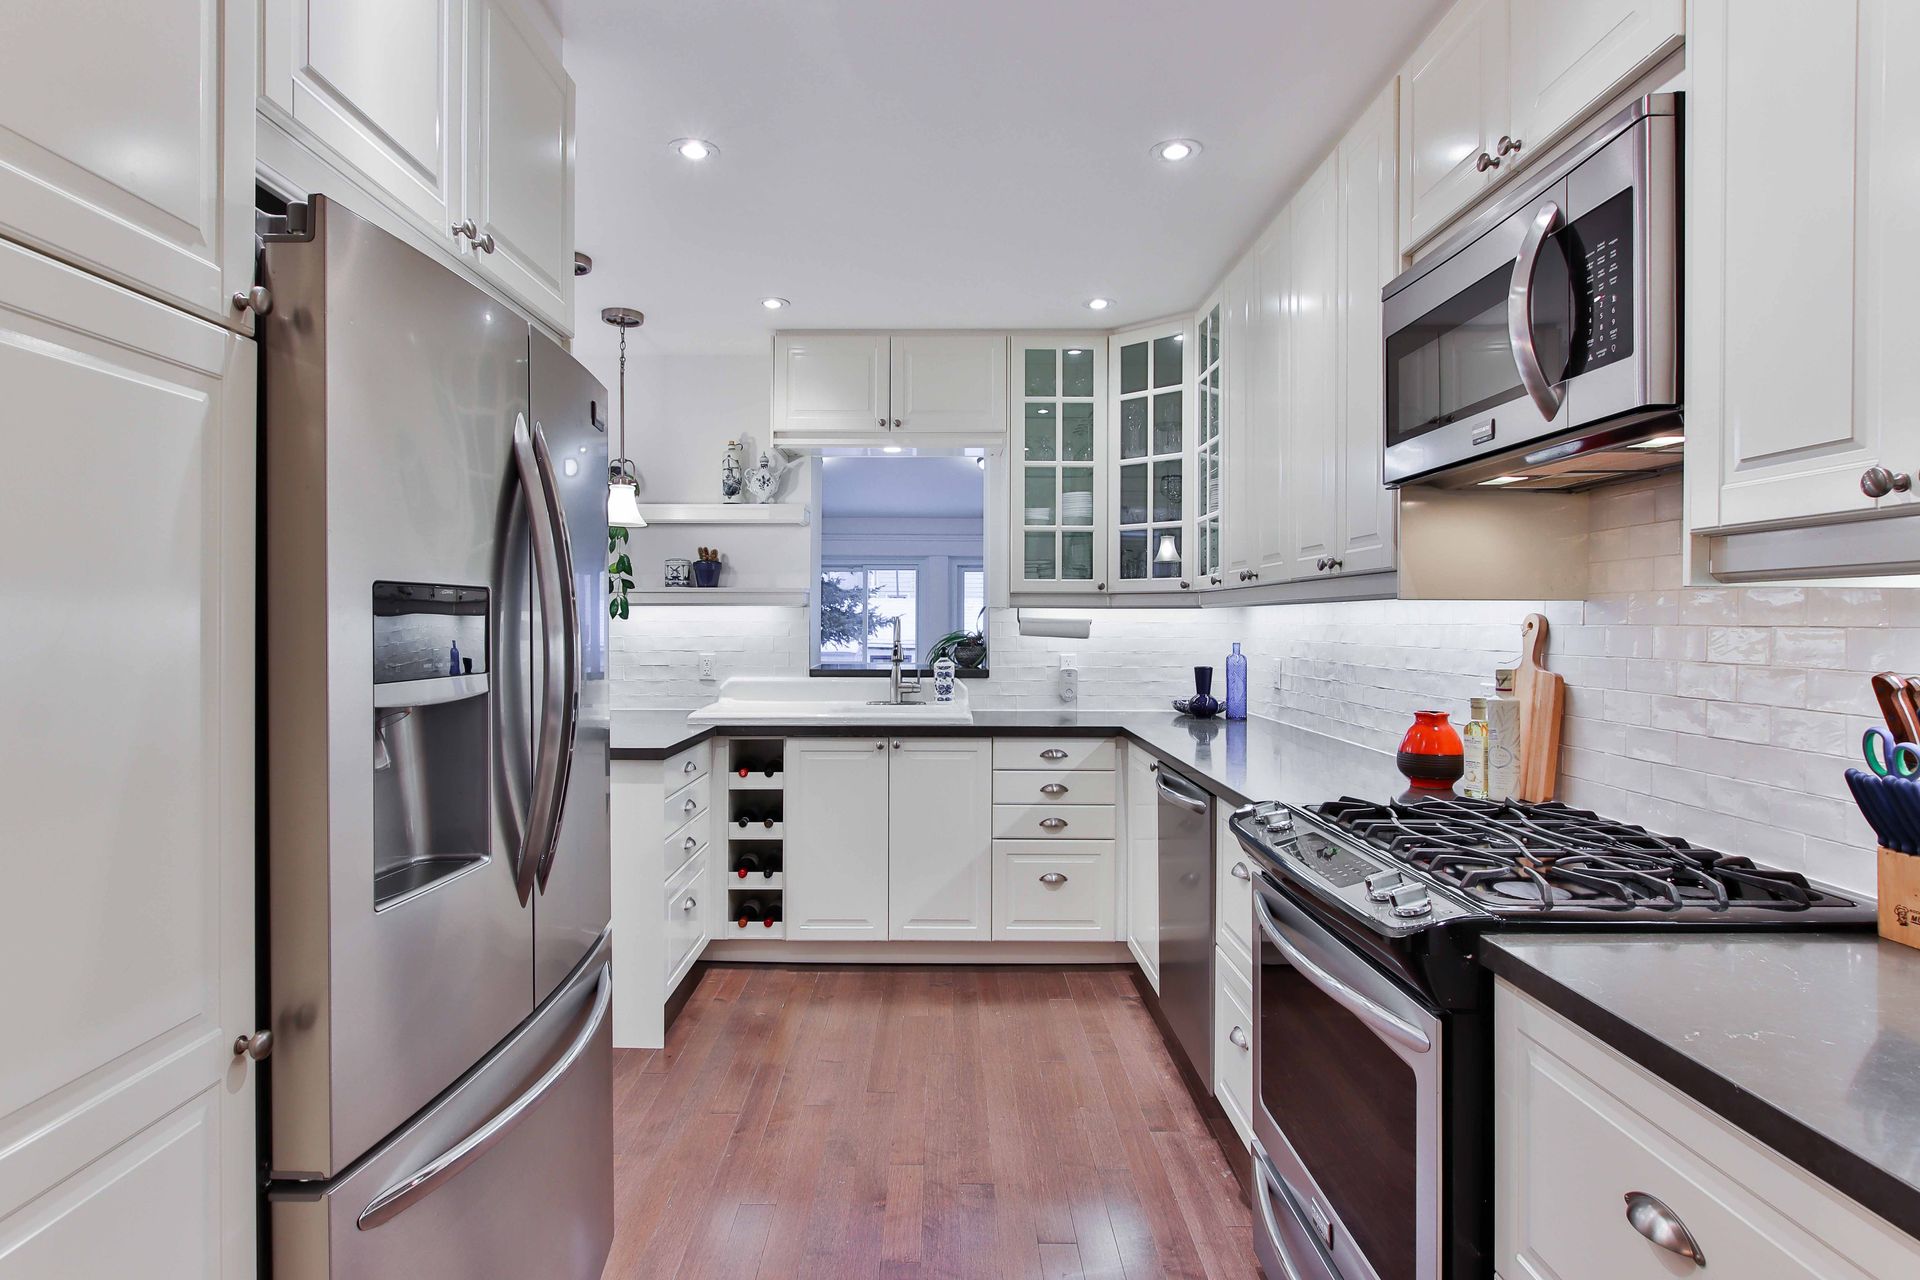 kitchen remodel galley style